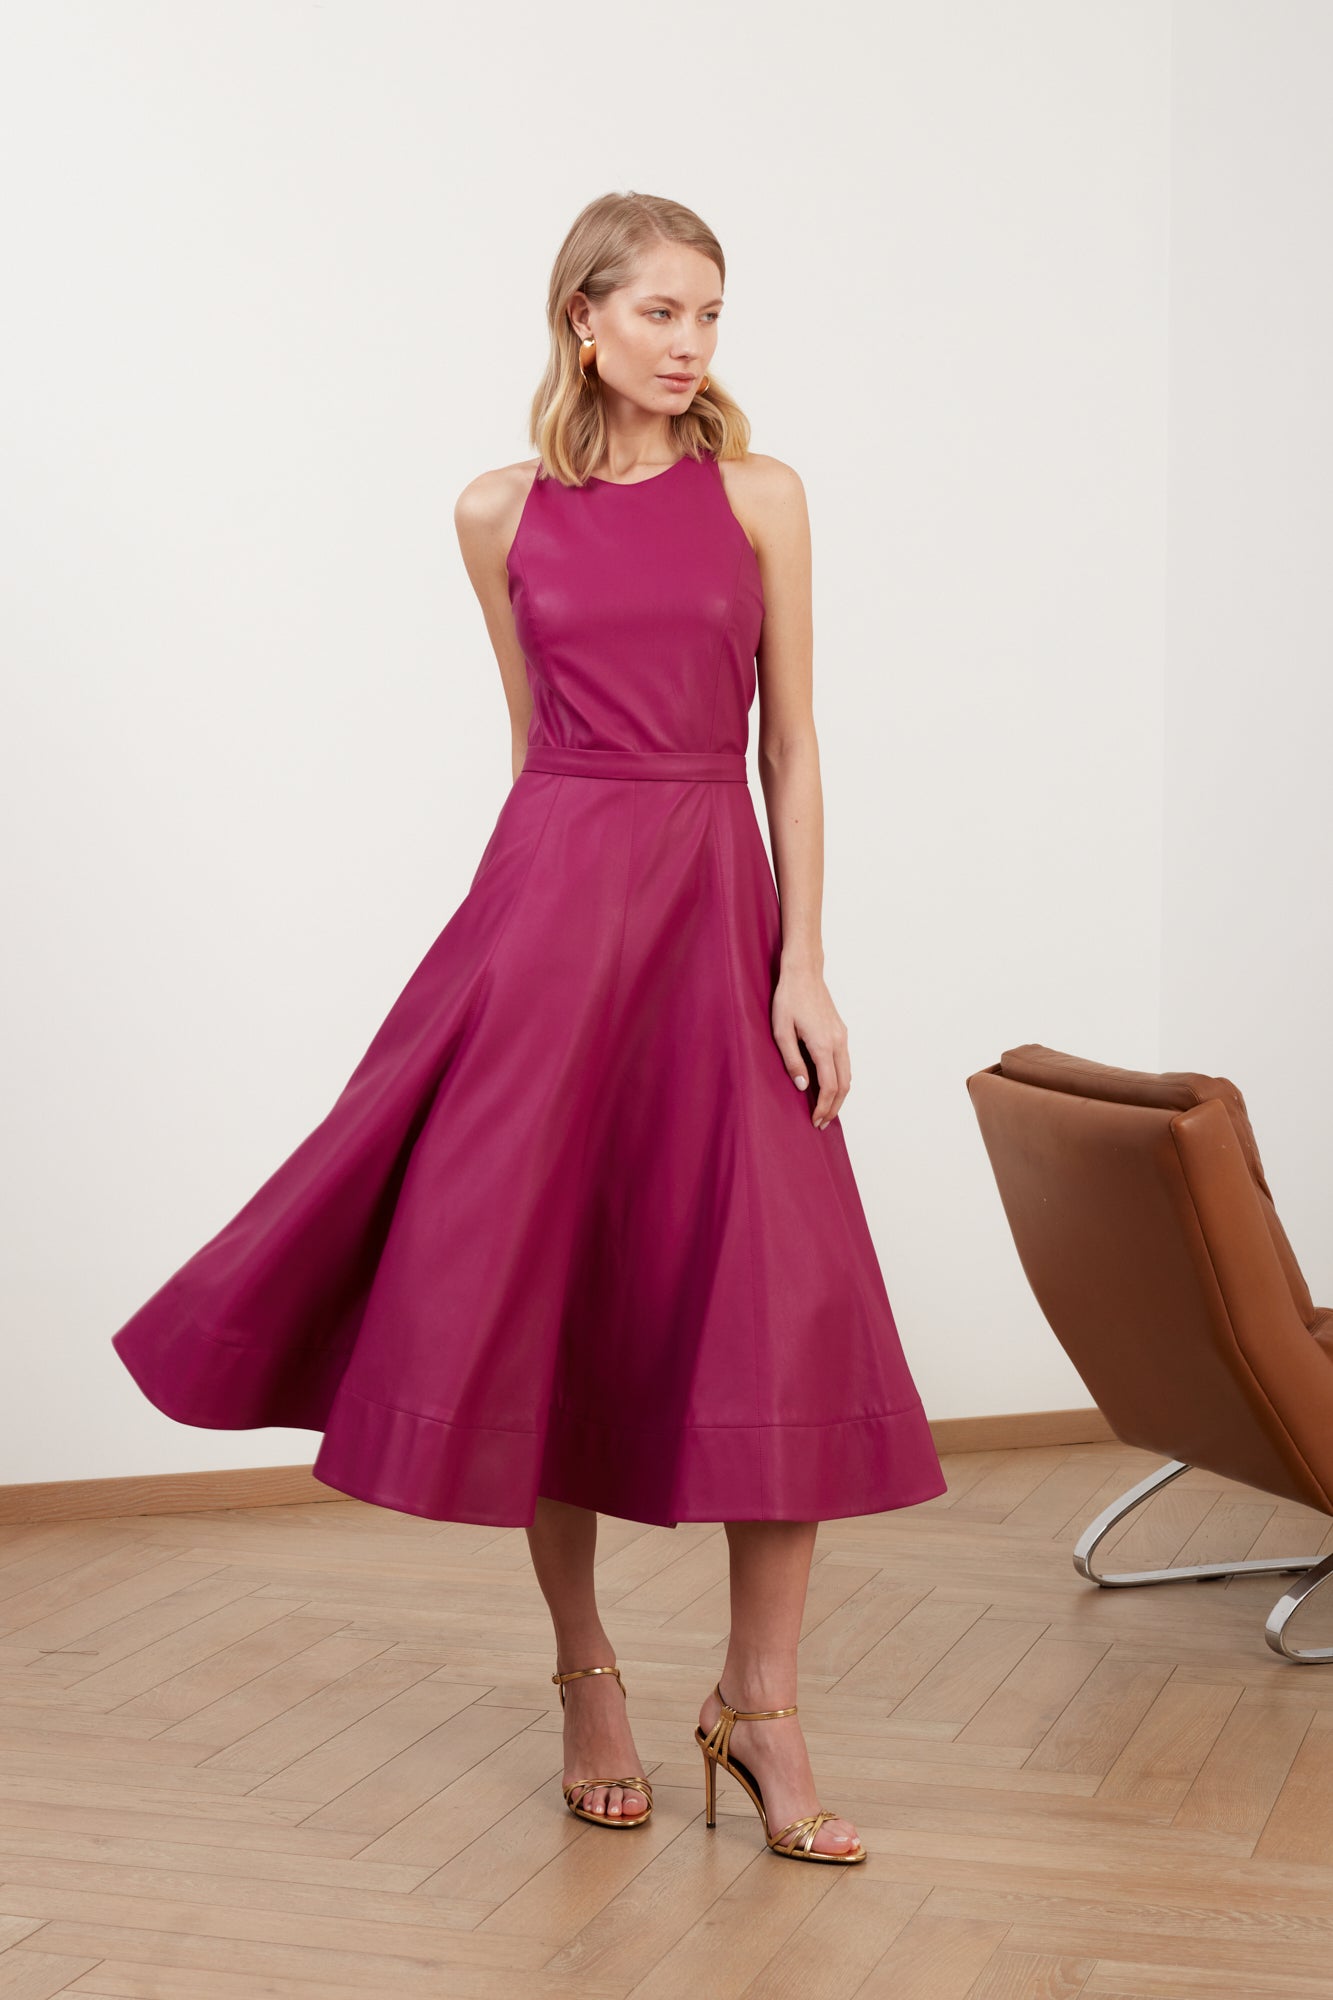 AVALON fuchsia pink faux leather cocktail dress